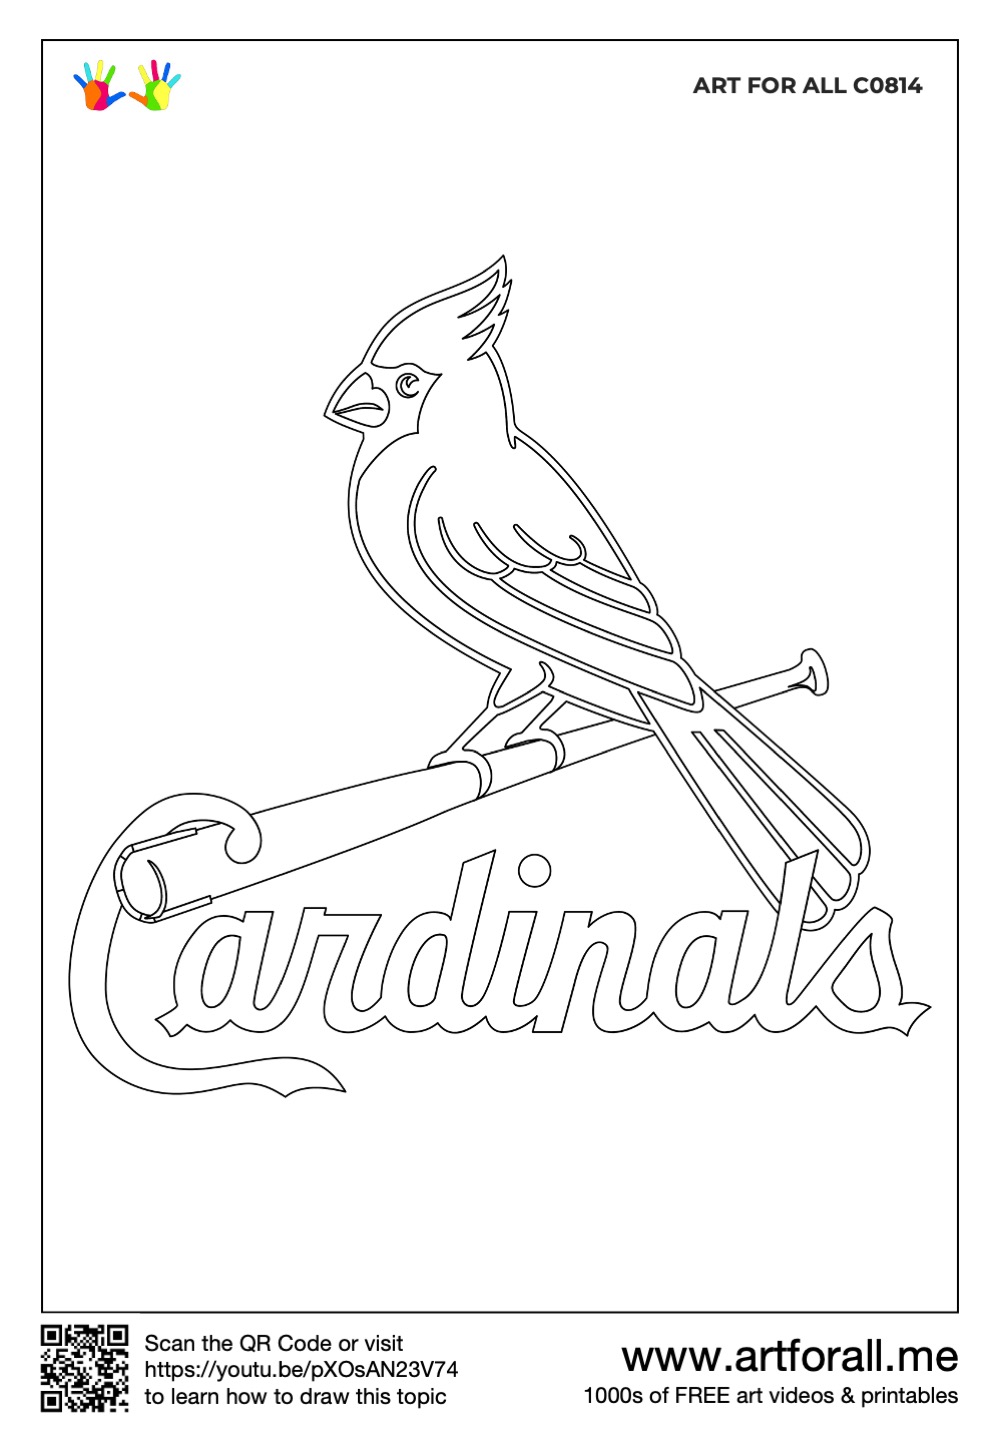 How to draw the st louis cardinals